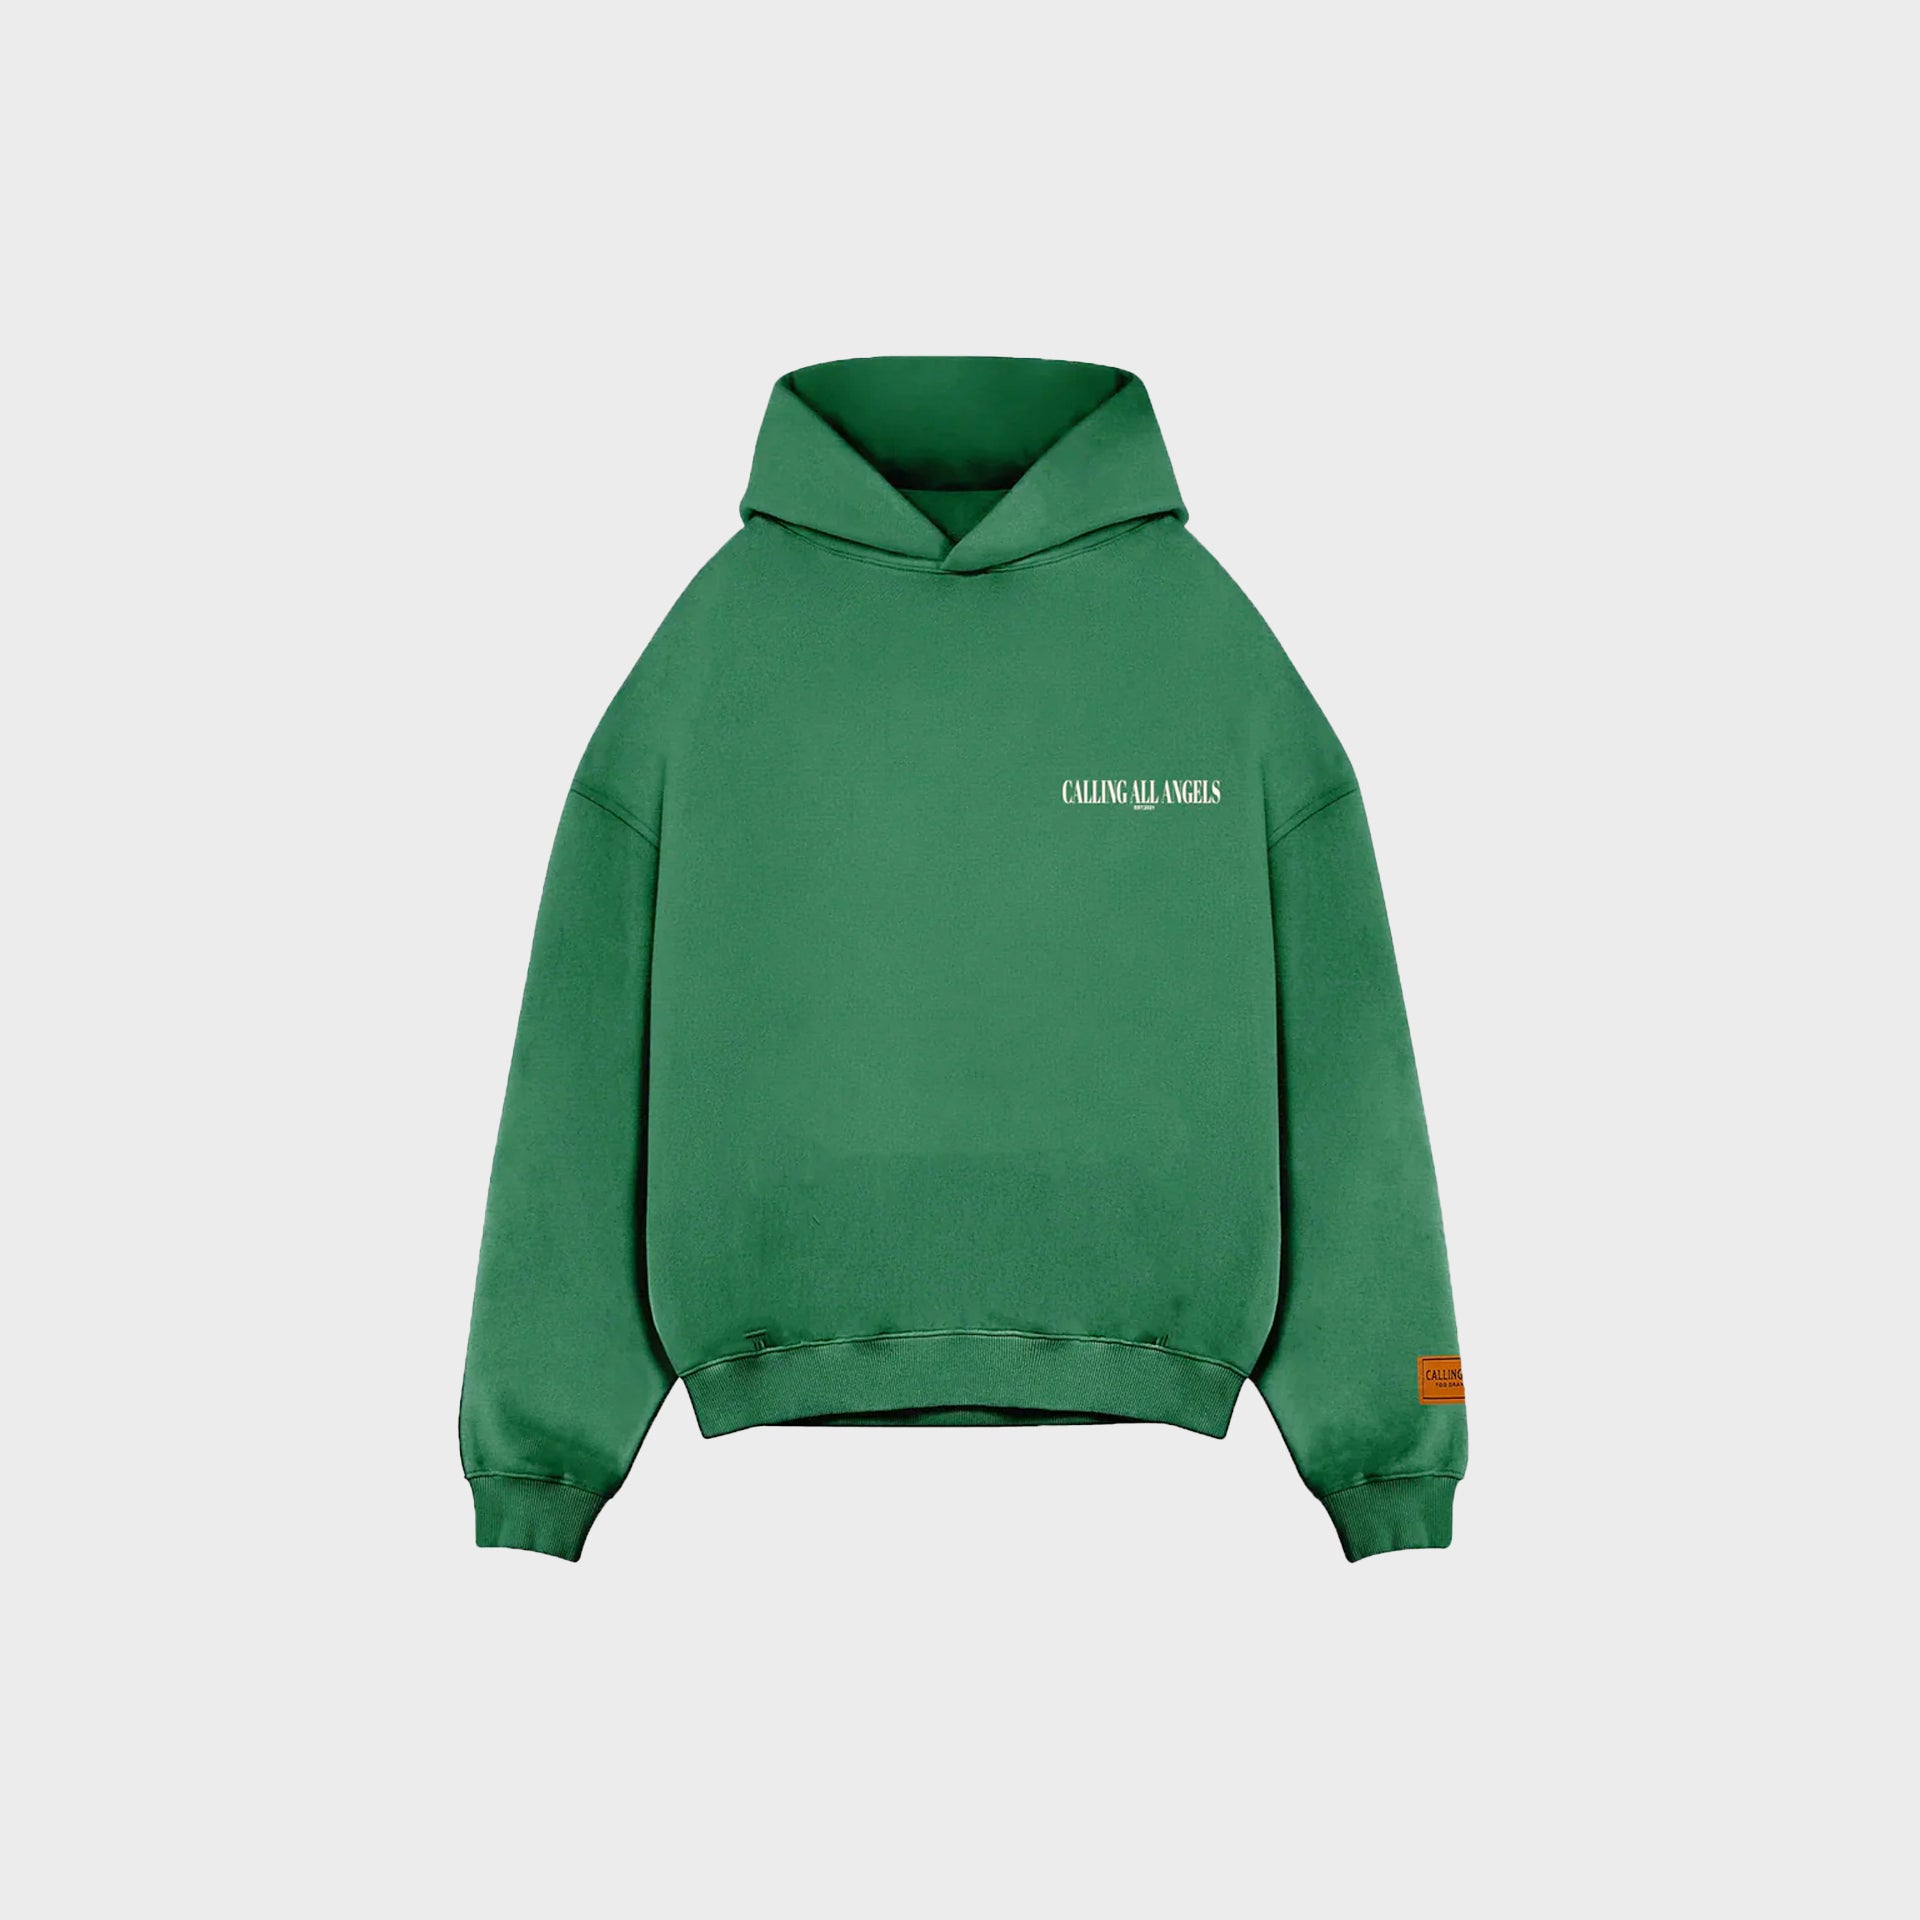 Je Parle Croissants Green Hoodie From Calling All Angels